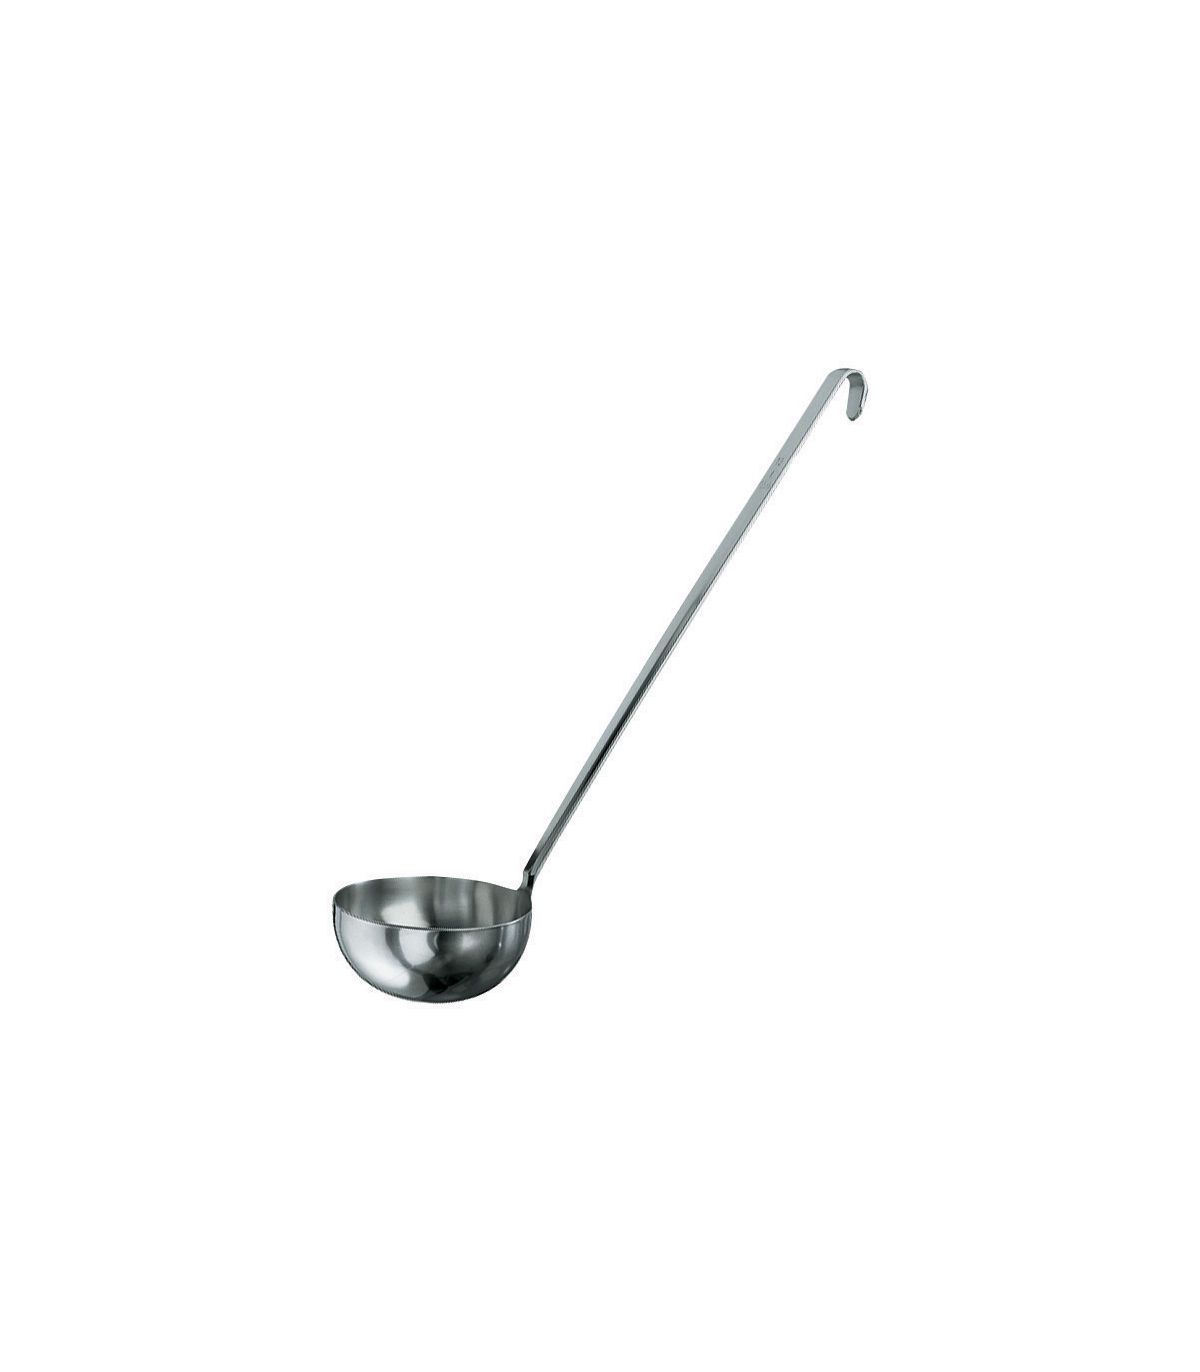 Winware Serving Ladle Premium Quality Stainless Steel ladle with Hook Handle - Long Enough to be Out of Harms Way, but Short Enough to give You Good Control 1 Litre Capacity 